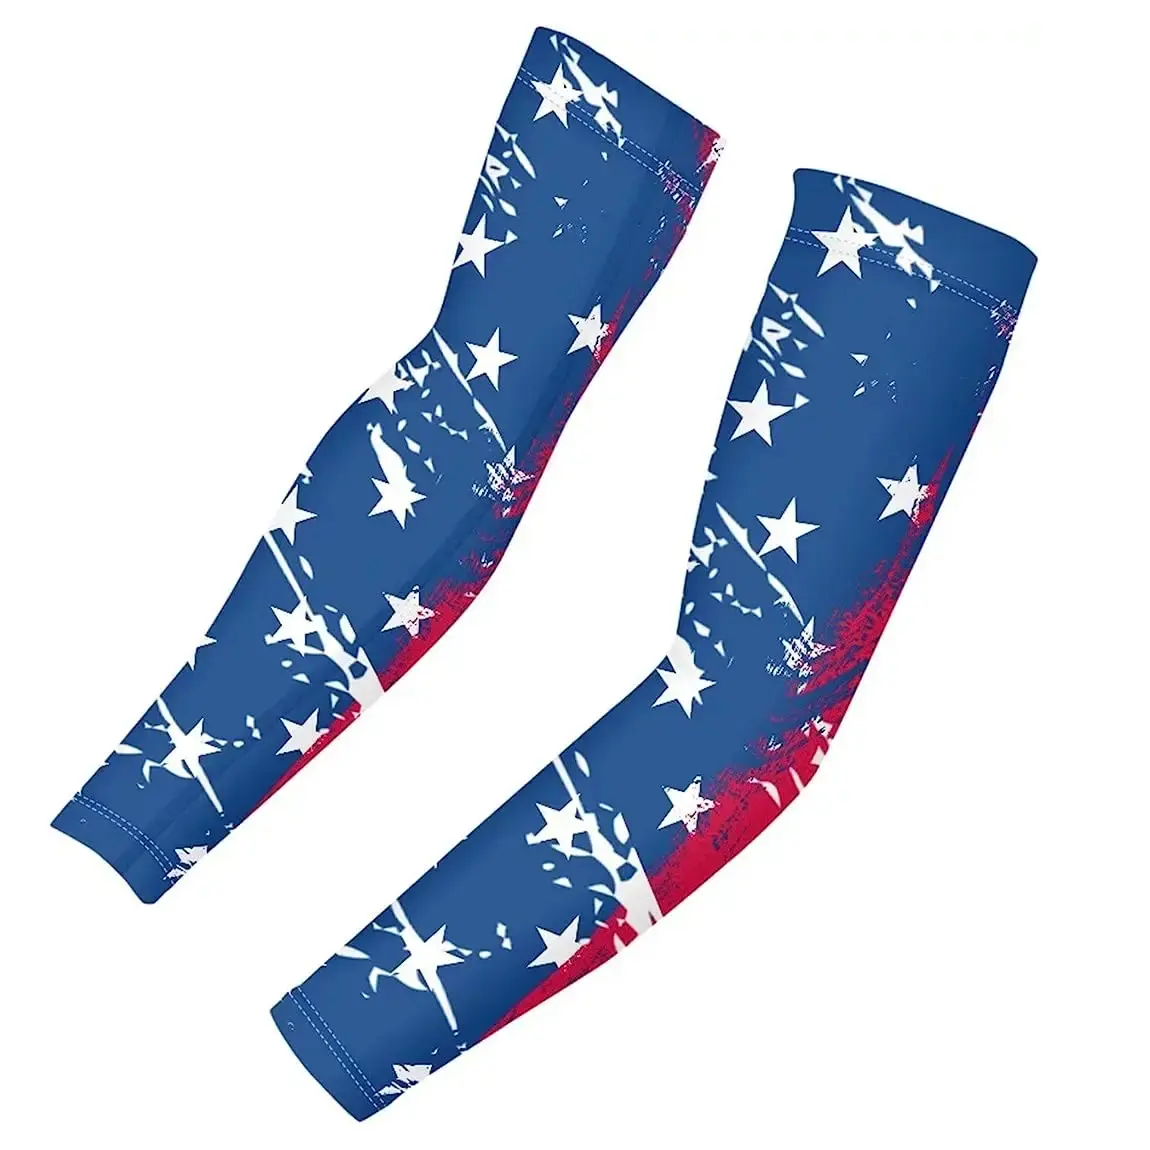 Pro Fit Arm Sleeves Running Sublimation Compression Basketball Fitness Sports Wear Cycling Arms Warmers